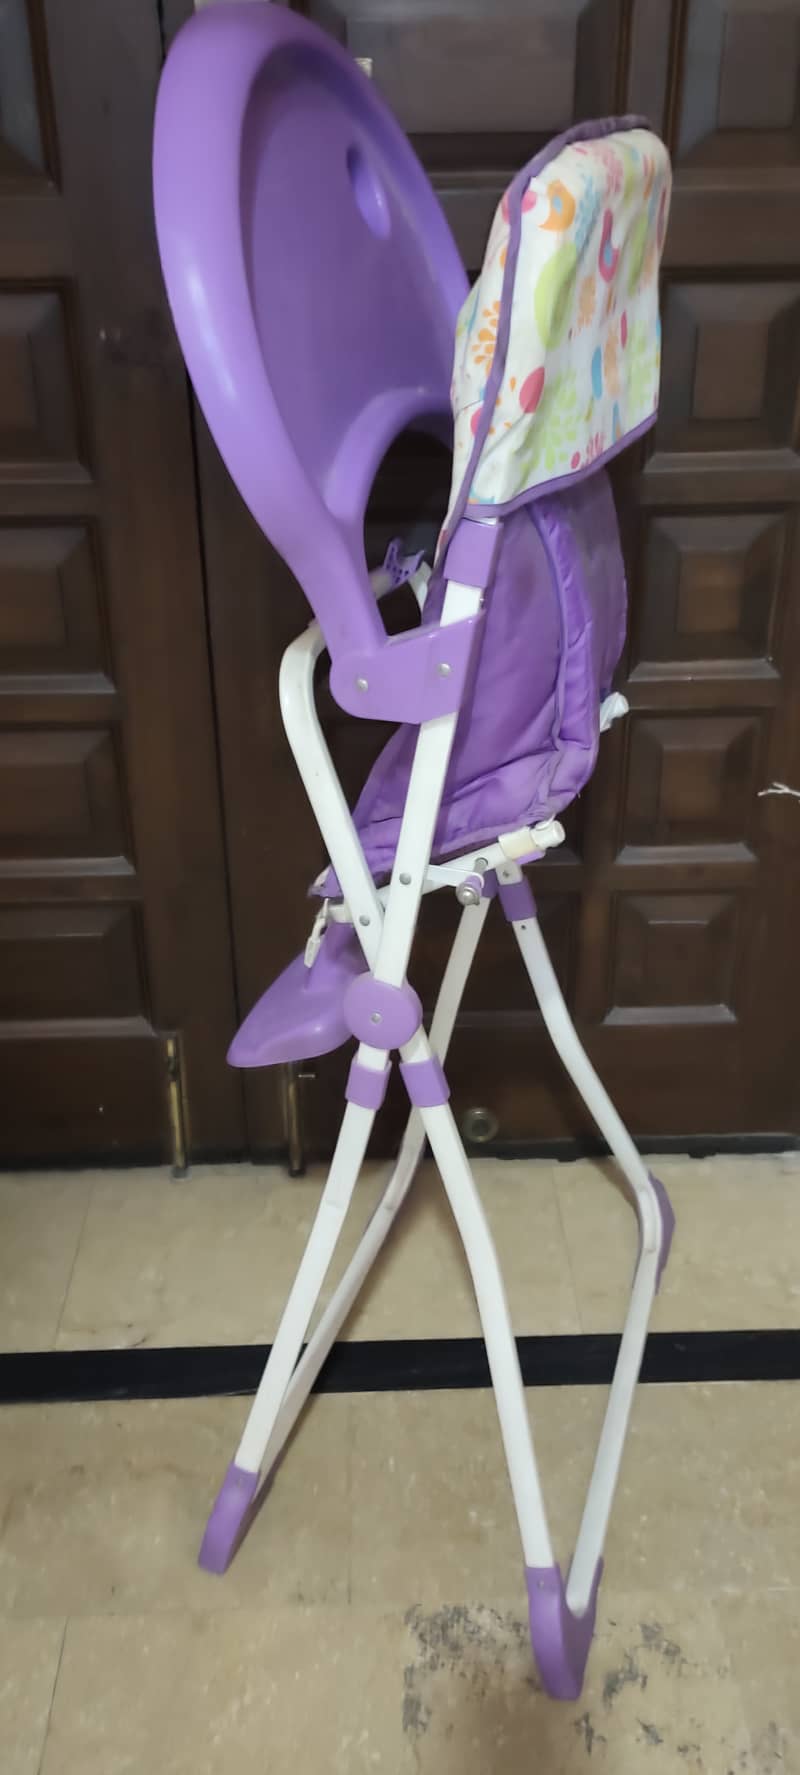 BABY DINNING CHAIR - (FOLDABLE) GOOD CONDITION 4